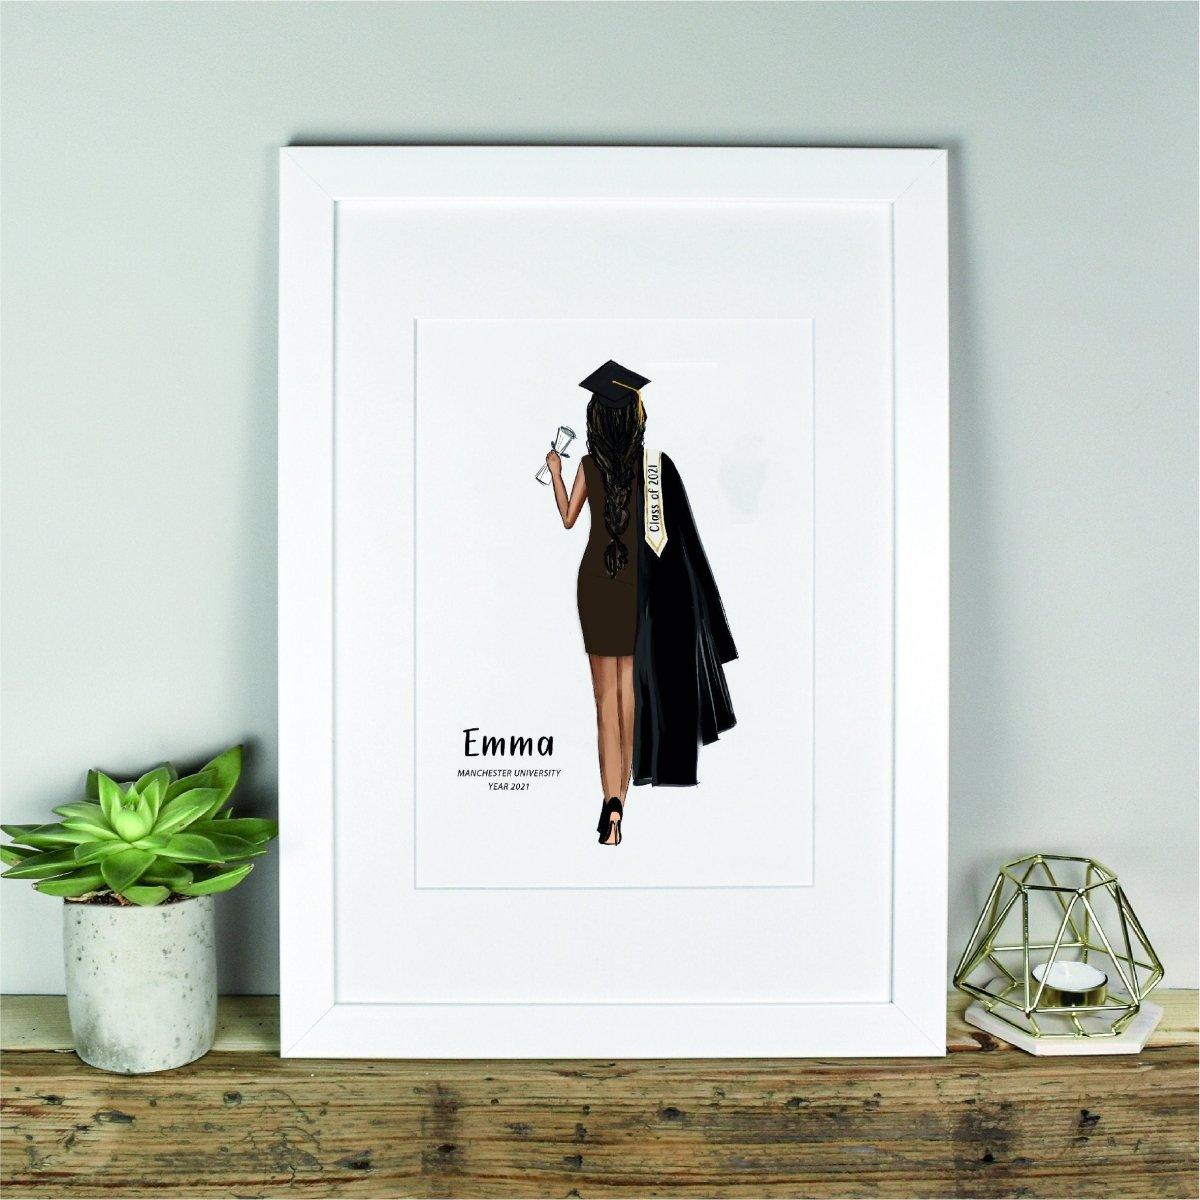 Personalised Graduation Print, Grad Gift, Custom Grad Print, College Grad, Grad Print, School Graduation Gift, Class Of Gift, University - Amy Lucy